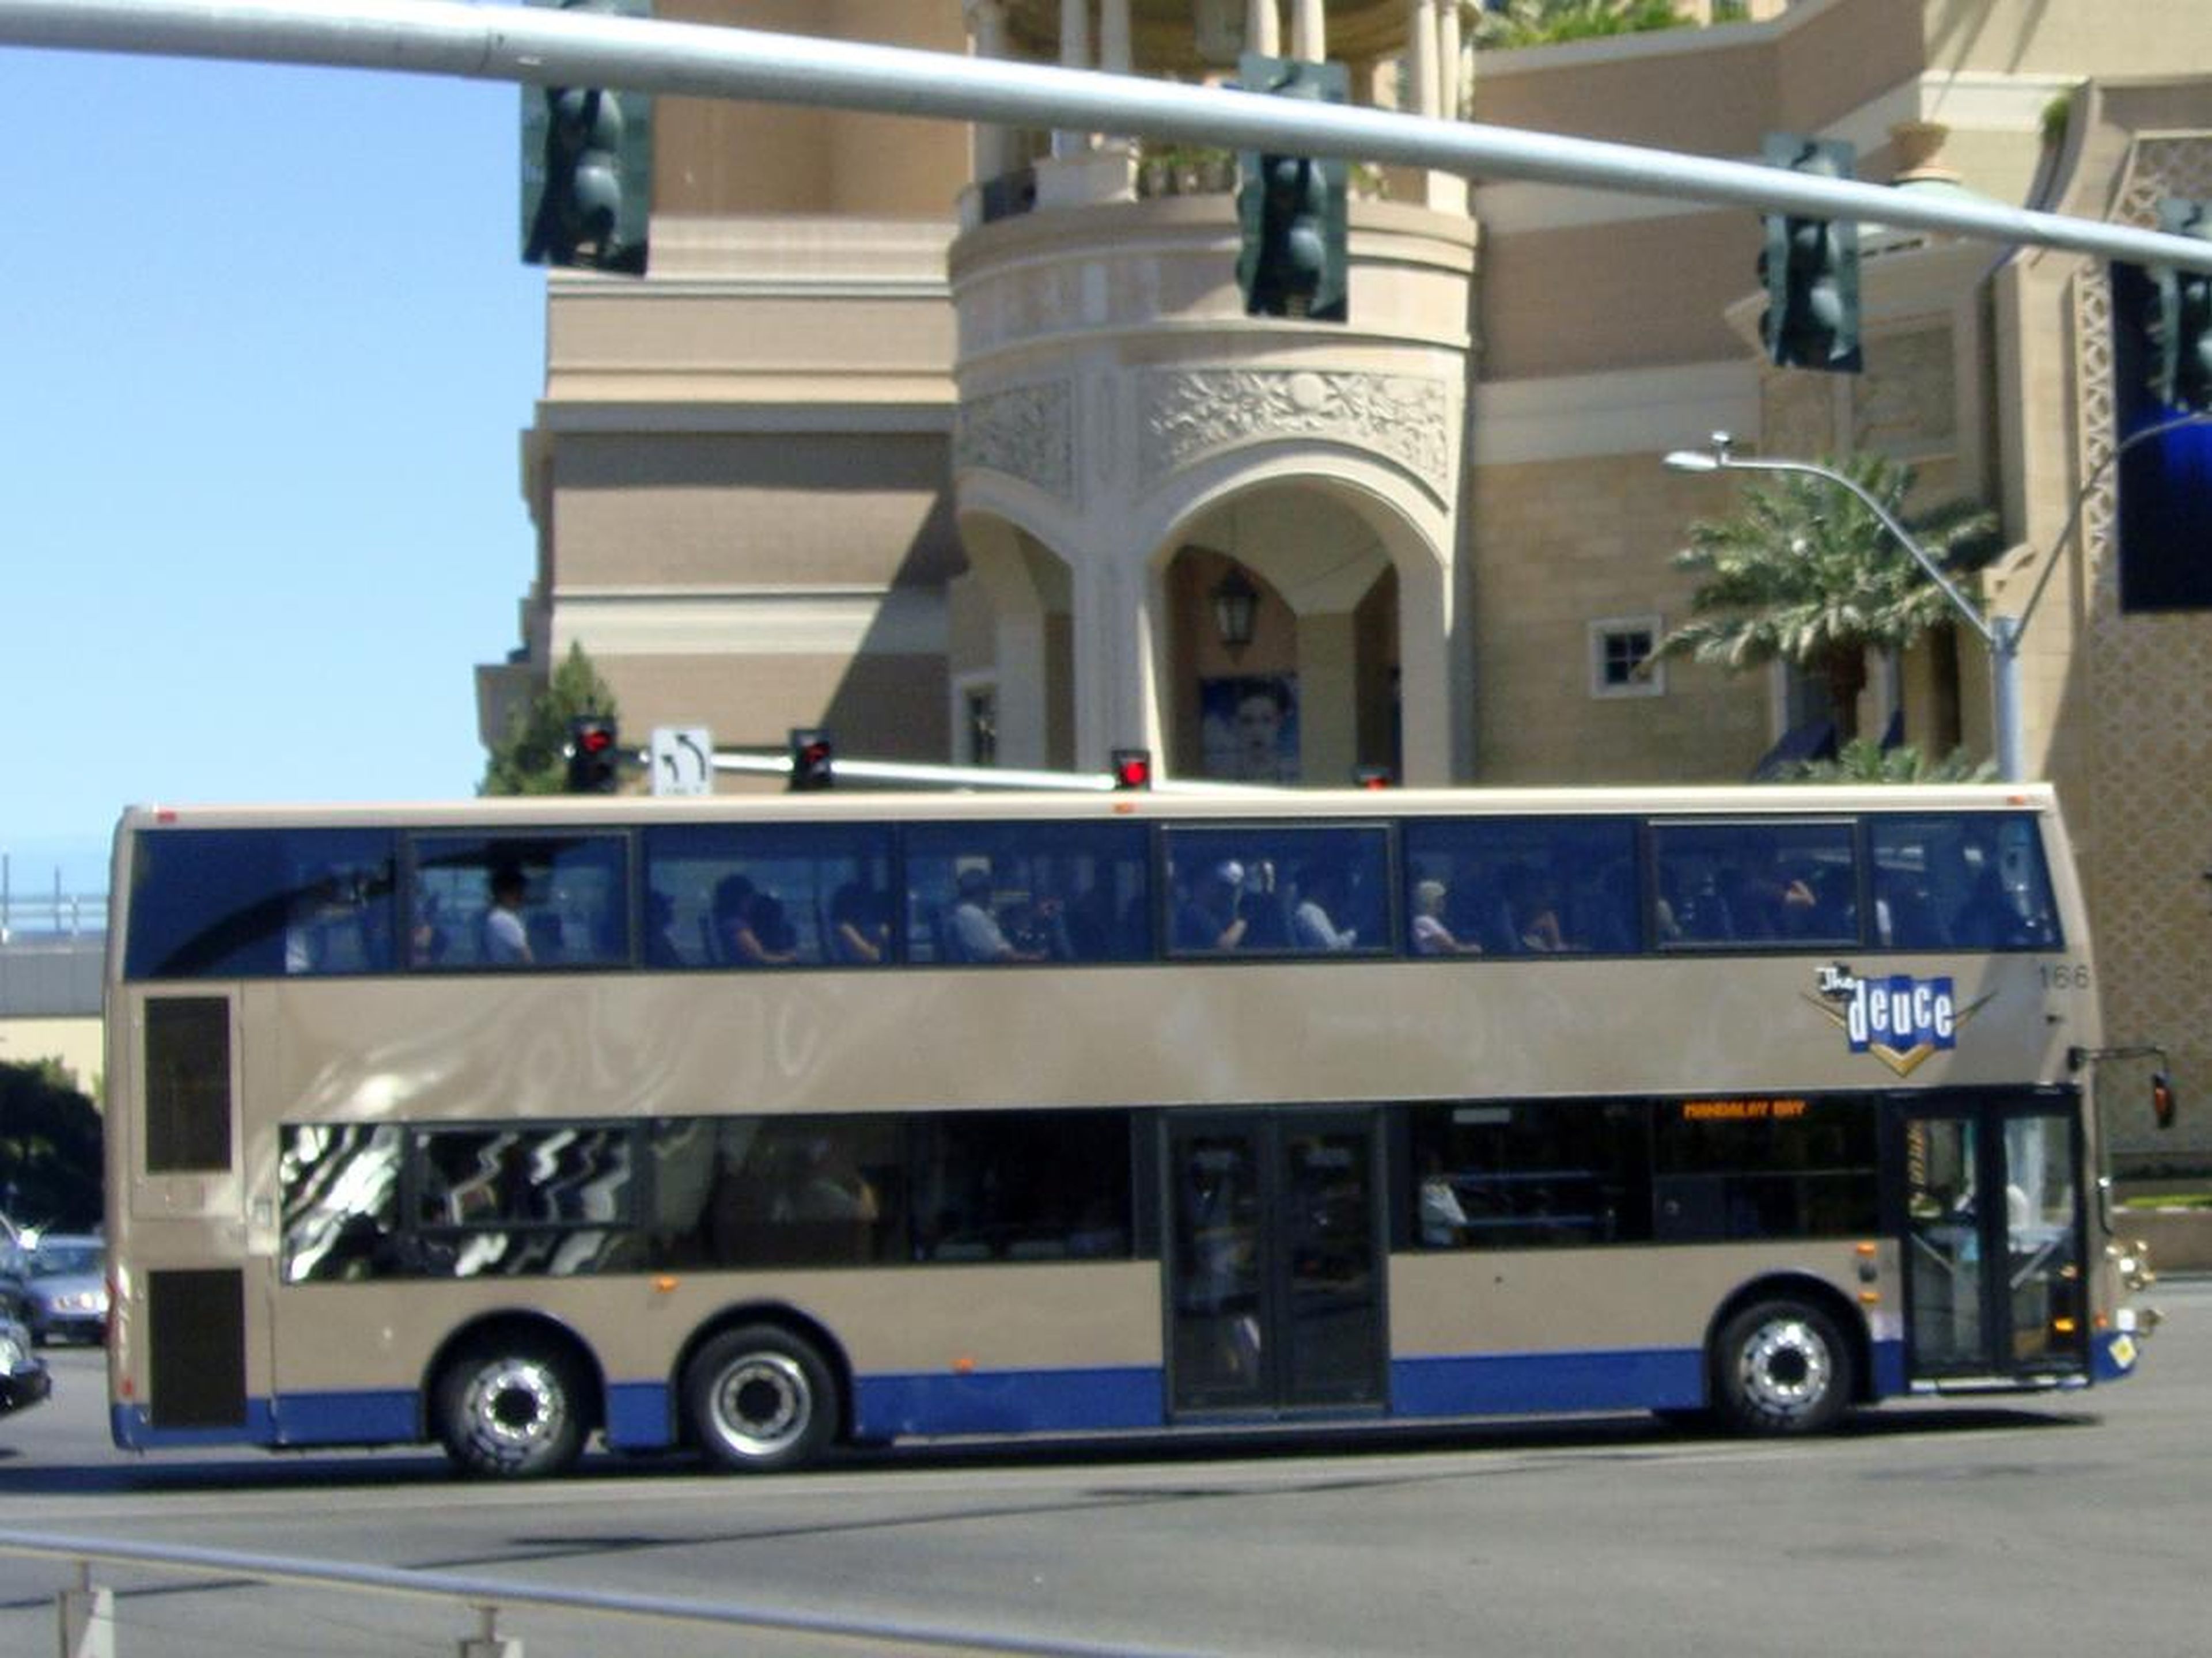 To ride one of Las Vegas' buses, you will need exact change to avoid severely overpaying. In addition, keep in mind the express route stops after midnight.